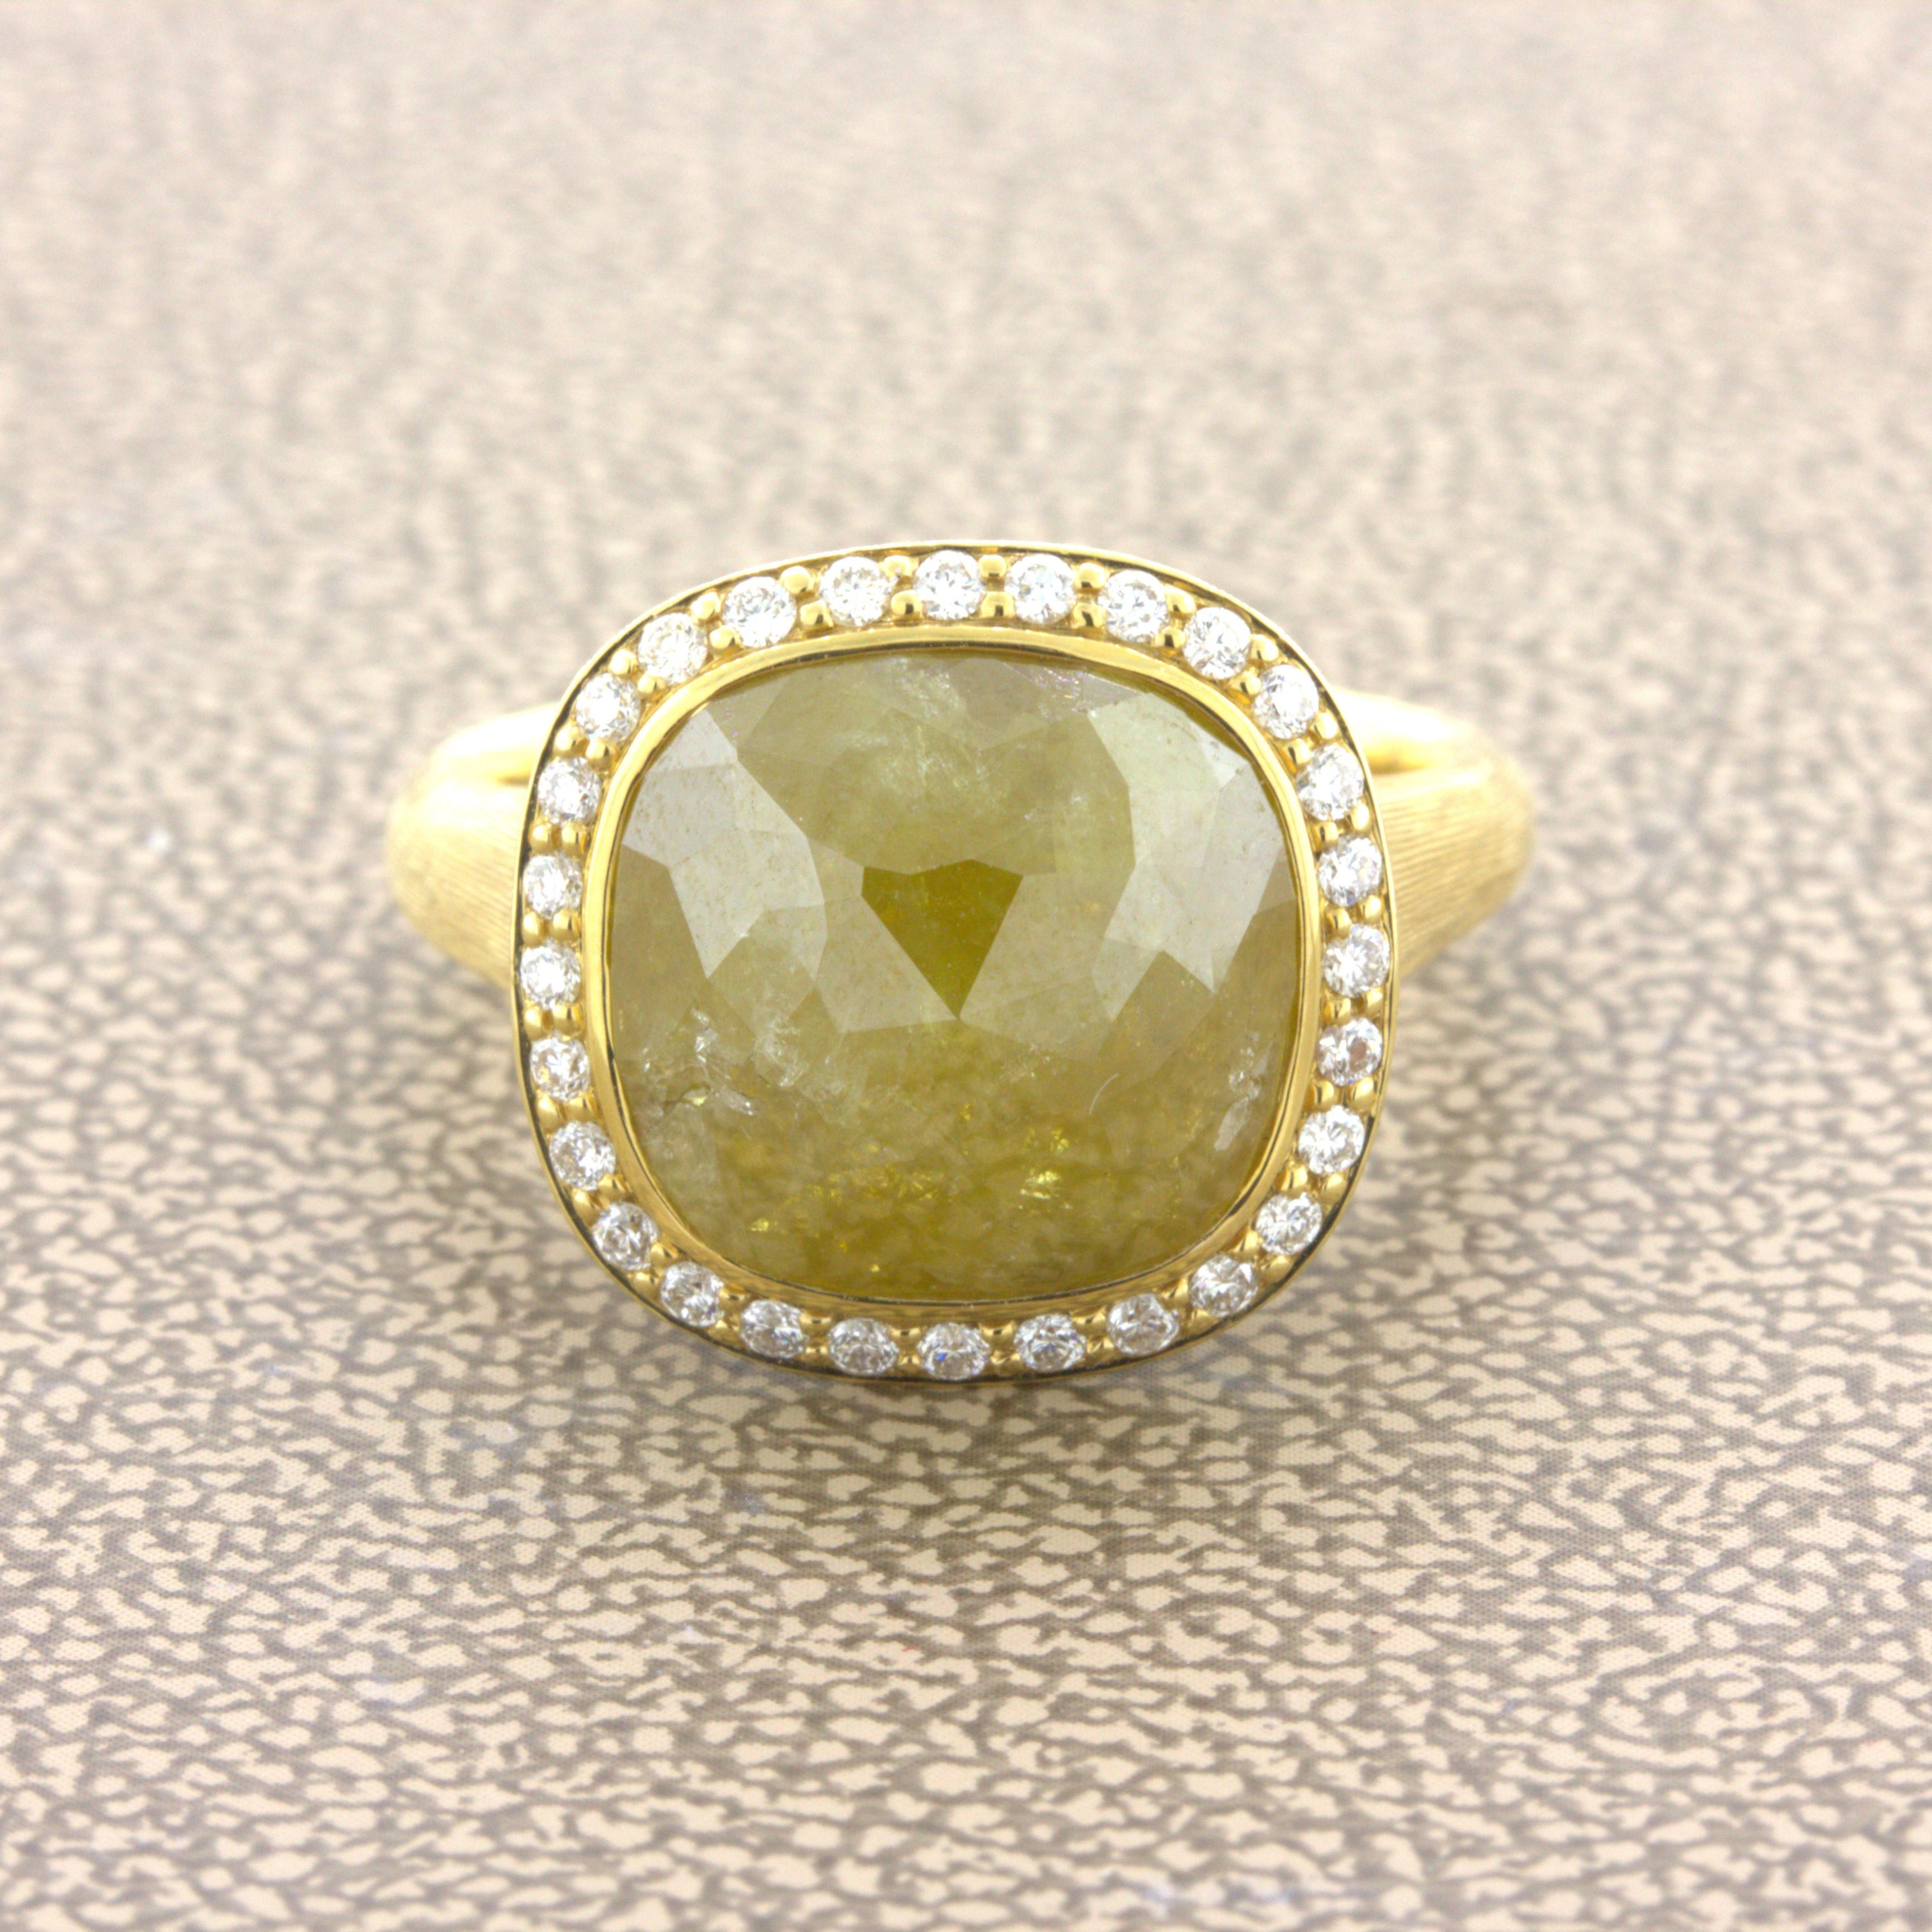 A chic and elegant gold ring featuring a 8.75 carat rose-cut diamond in its center. It has a fancy deep-yellow color along with a unique rose-cut that pops out of the setting. It is haloed by 0.27 carats of round brilliant-cut diamonds. Made in 18k